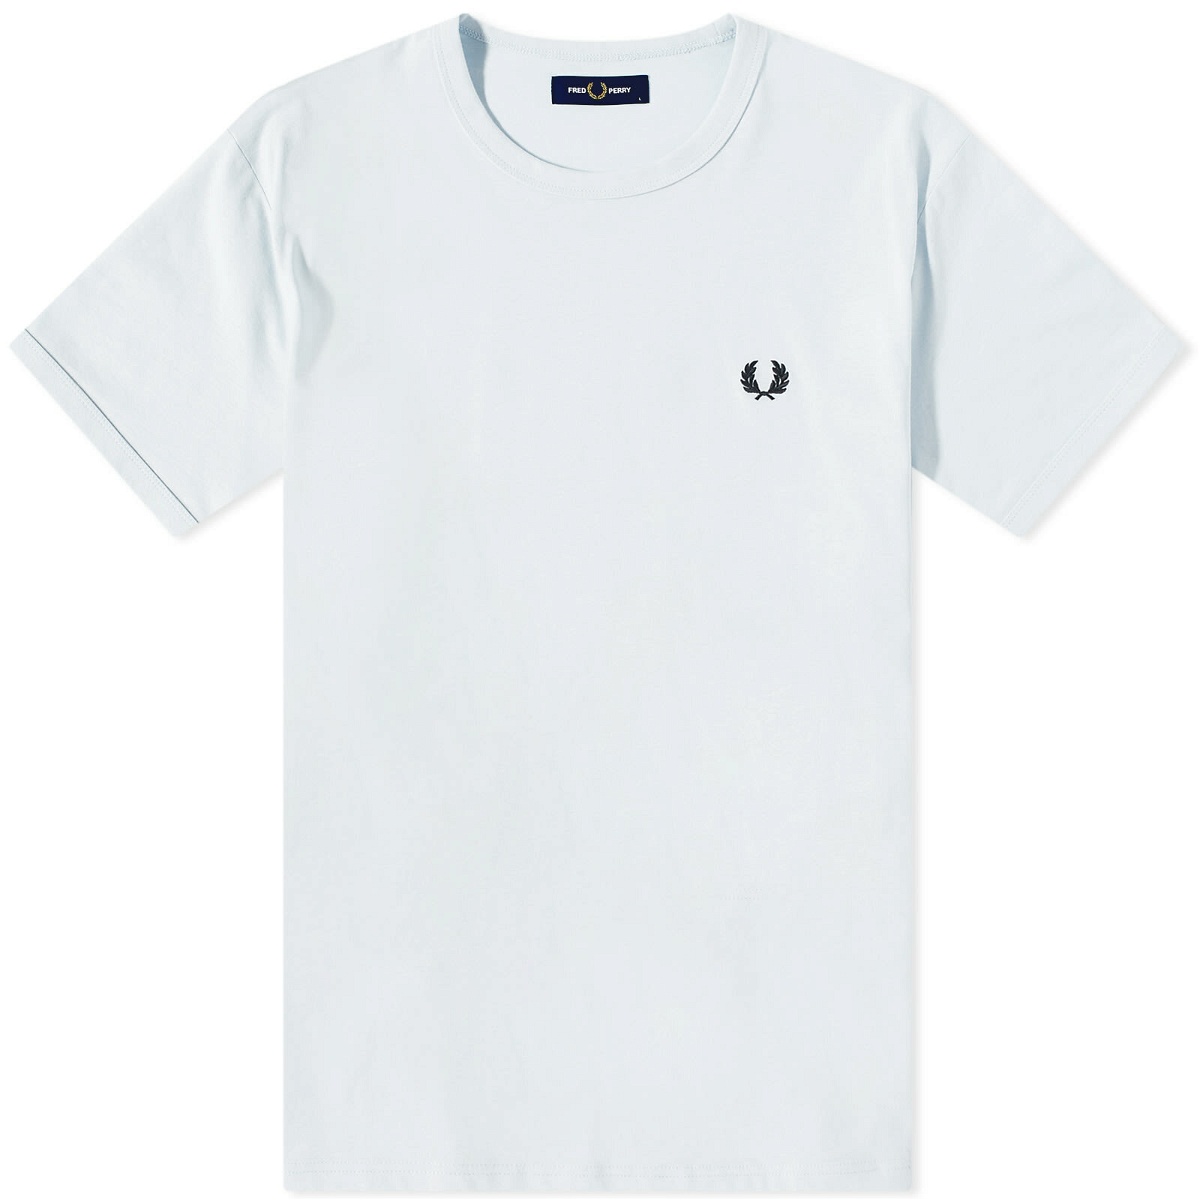 Fred Perry Men's Ringer T-Shirt in Light Ice Fred Perry